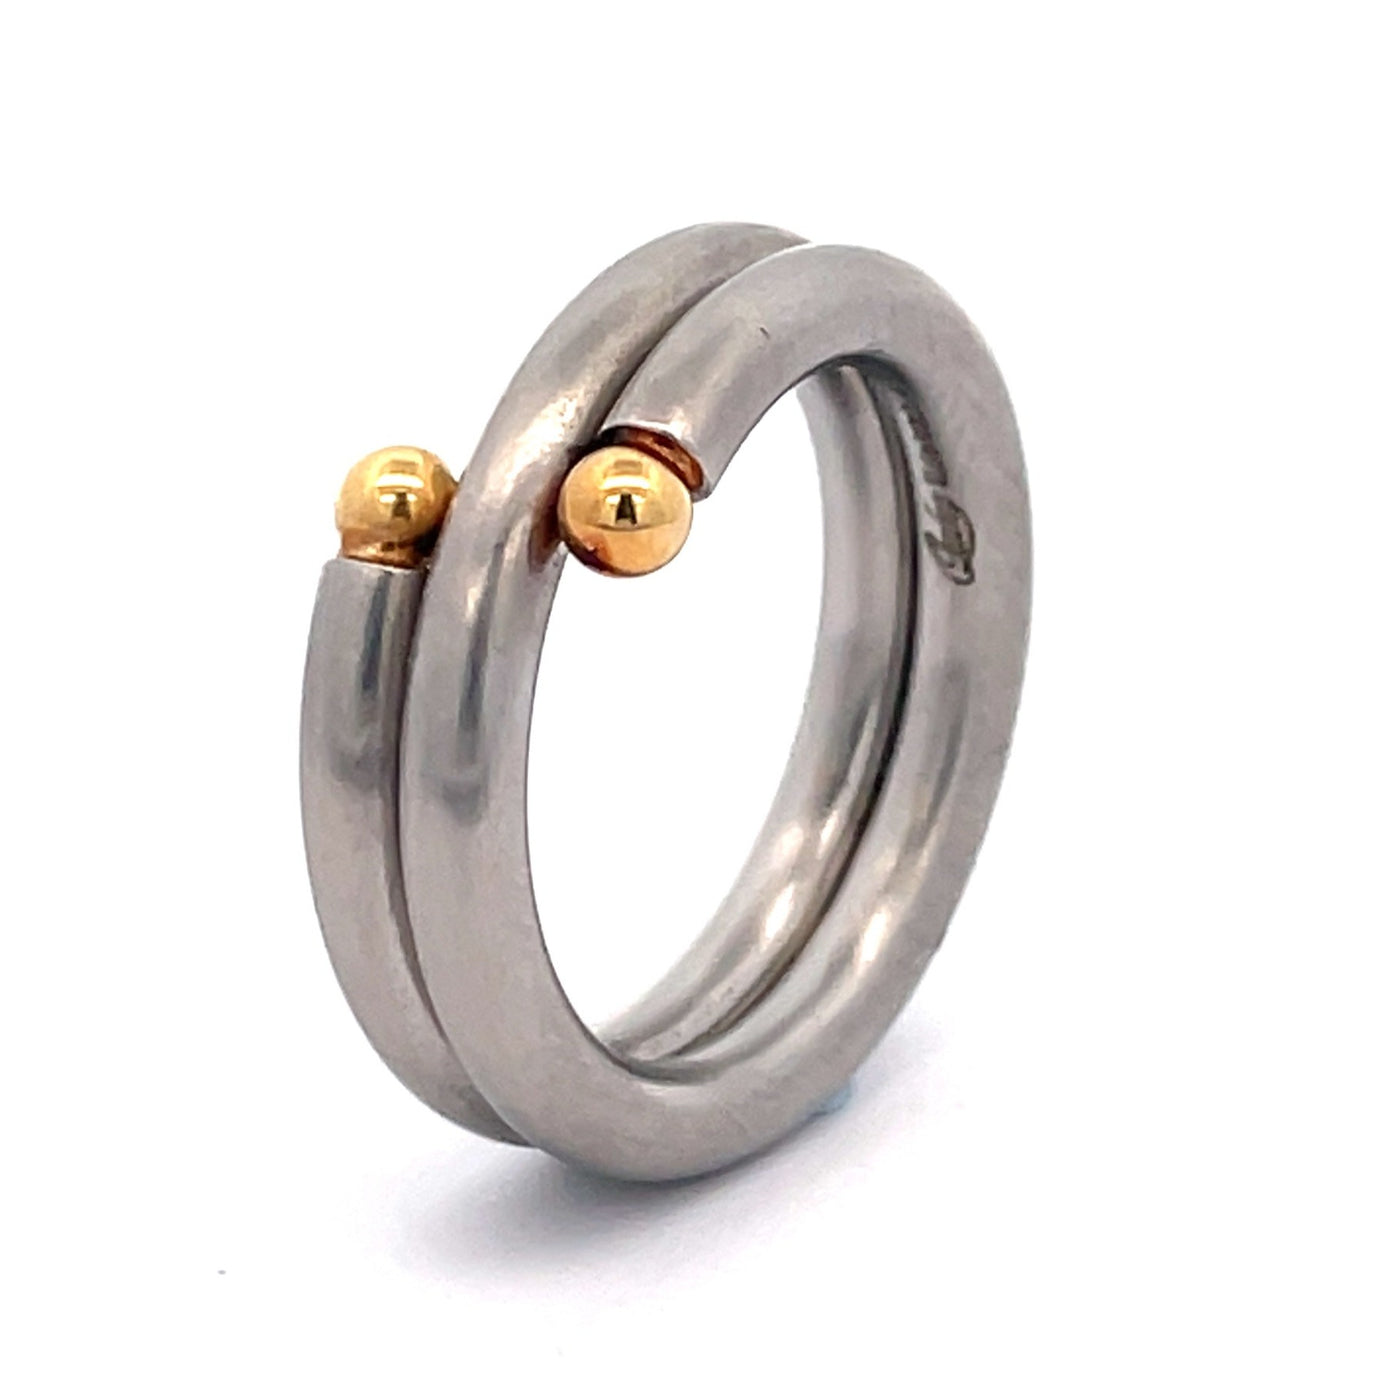 Stainless Steel & 18ct Coil Ring Size N